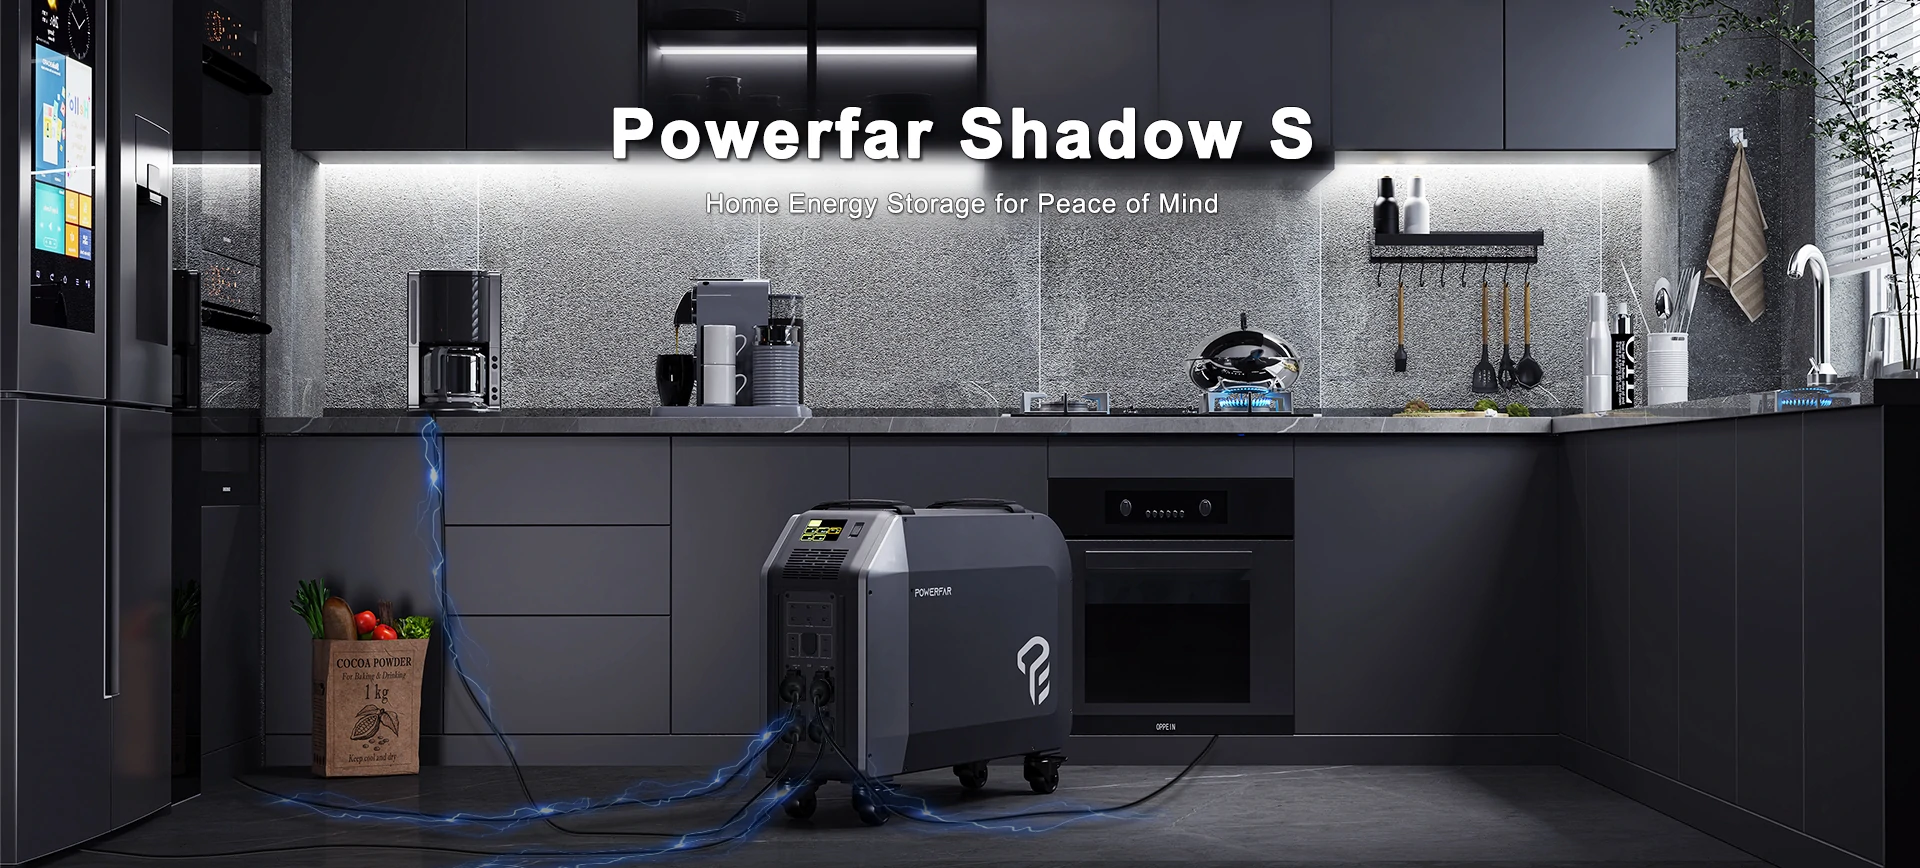 Powerfar Shadow S, Home Energy Storage for Peace of Mind.